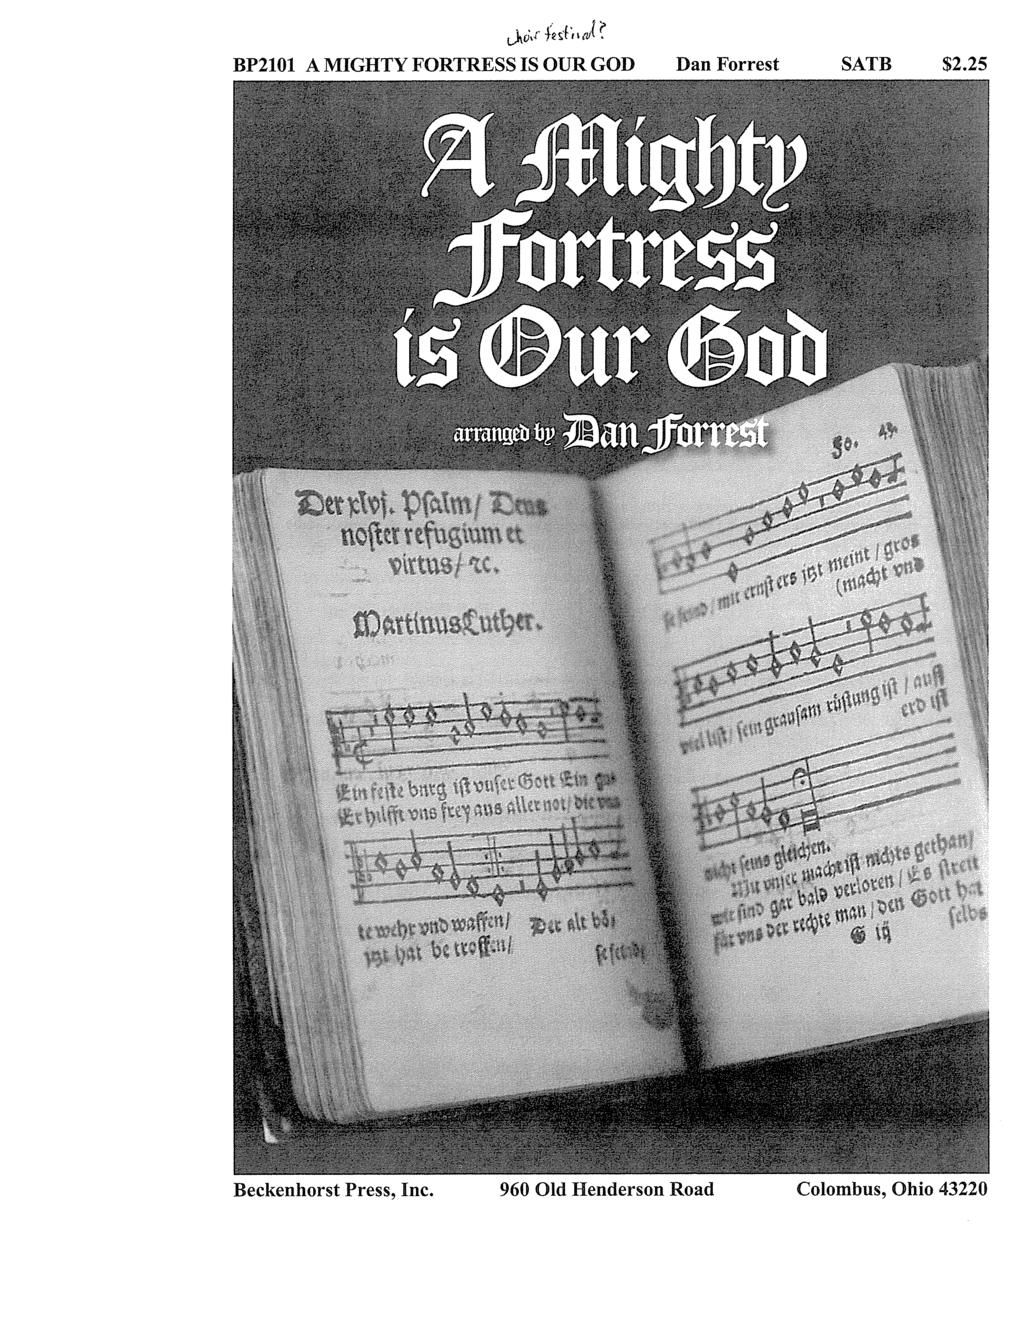 BP21O1 A MIGHTY FORTRESS IS OUR GOD Dan Forrest SATB